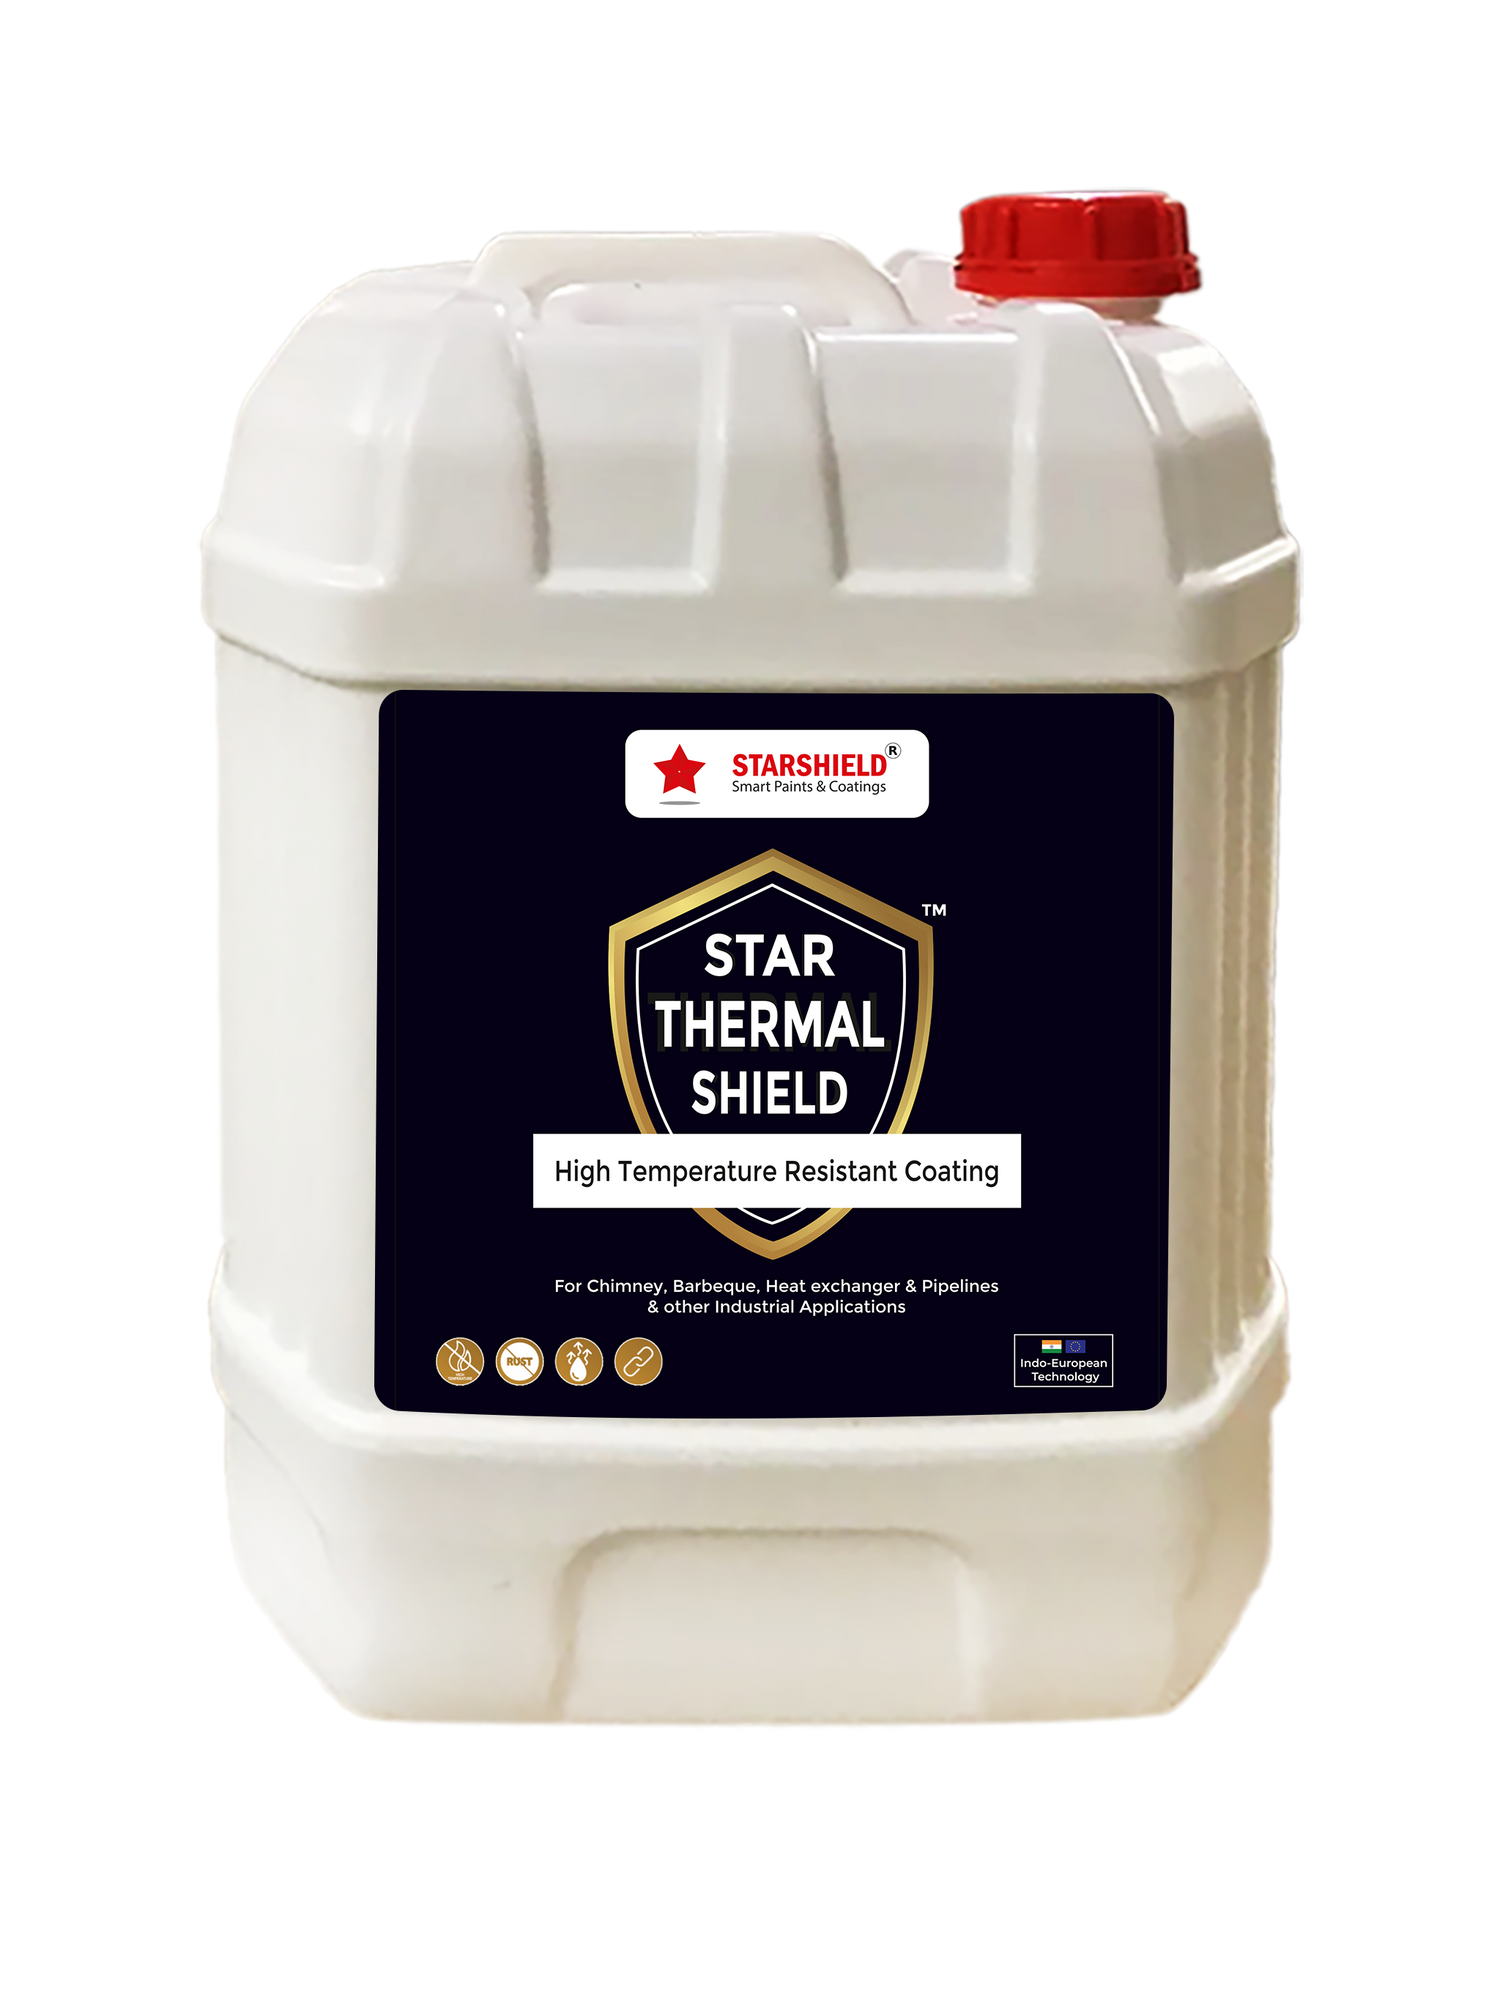  Discover Star Thermal Shield: Energy Saving properties, Highest SRI Coating value of 130. IGBC, GRIHA approved.